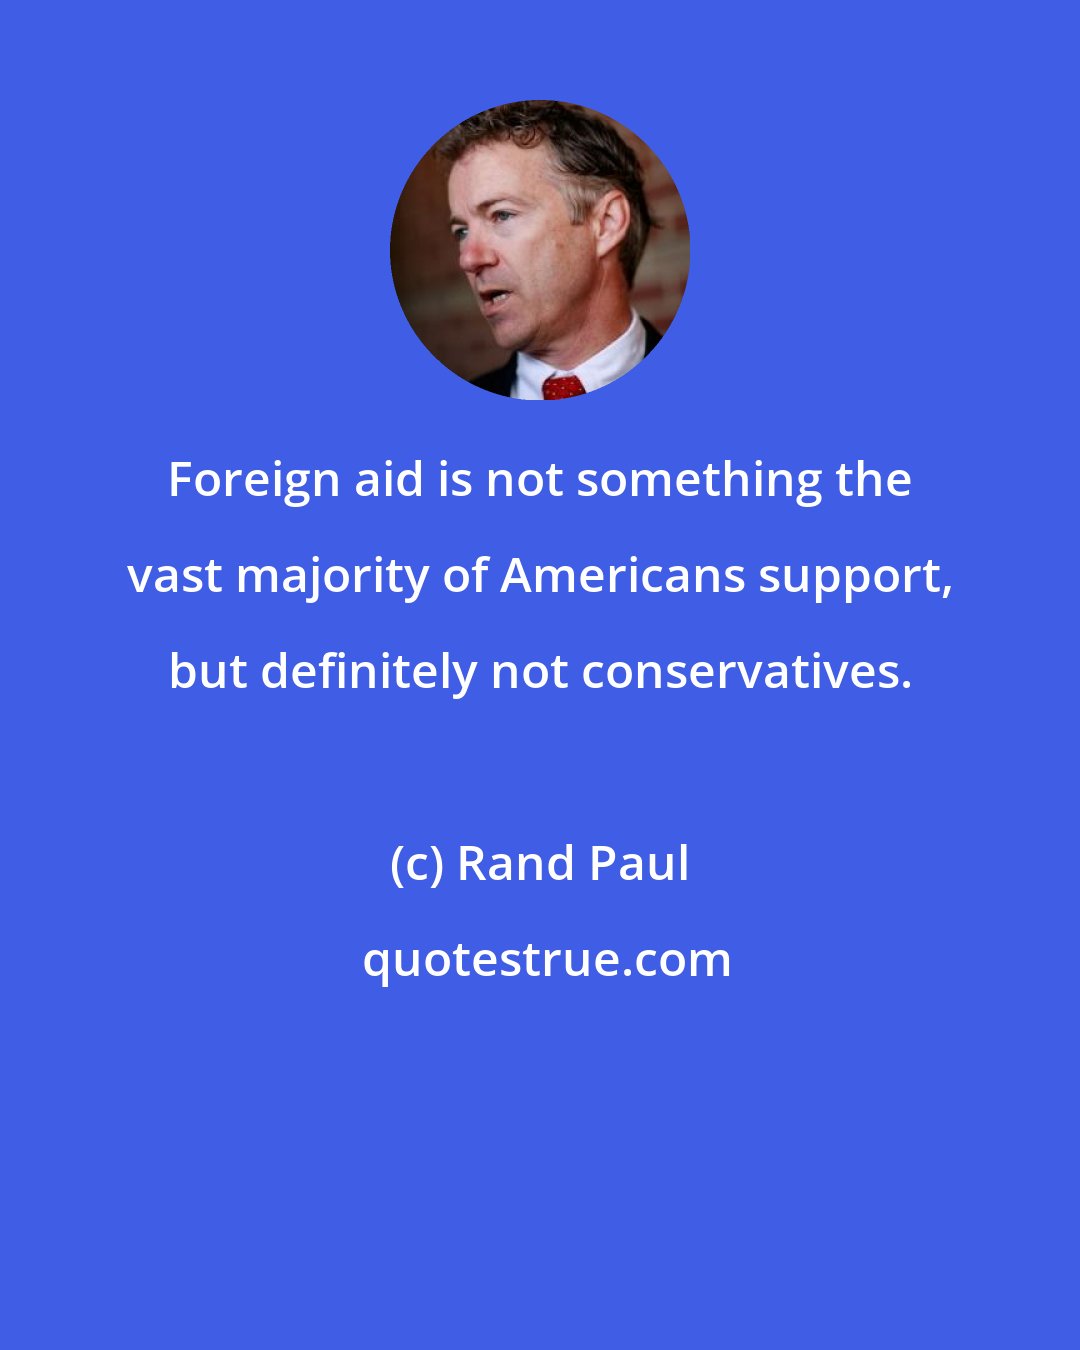 Rand Paul: Foreign aid is not something the vast majority of Americans support, but definitely not conservatives.